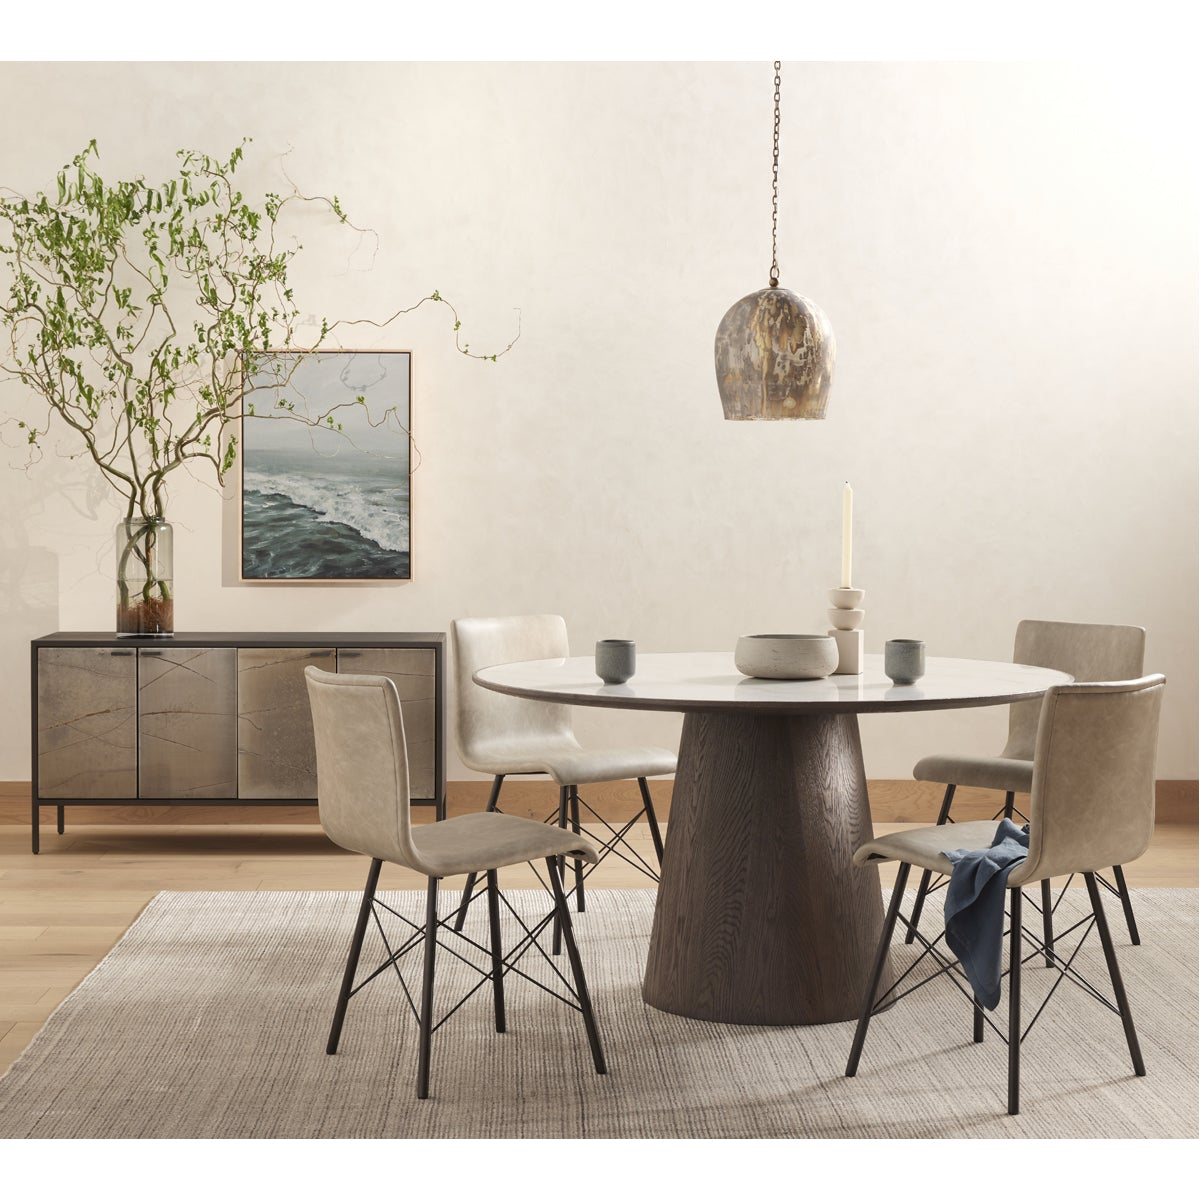 Four Hands Hughes Skye Round Dining Table - White Marble